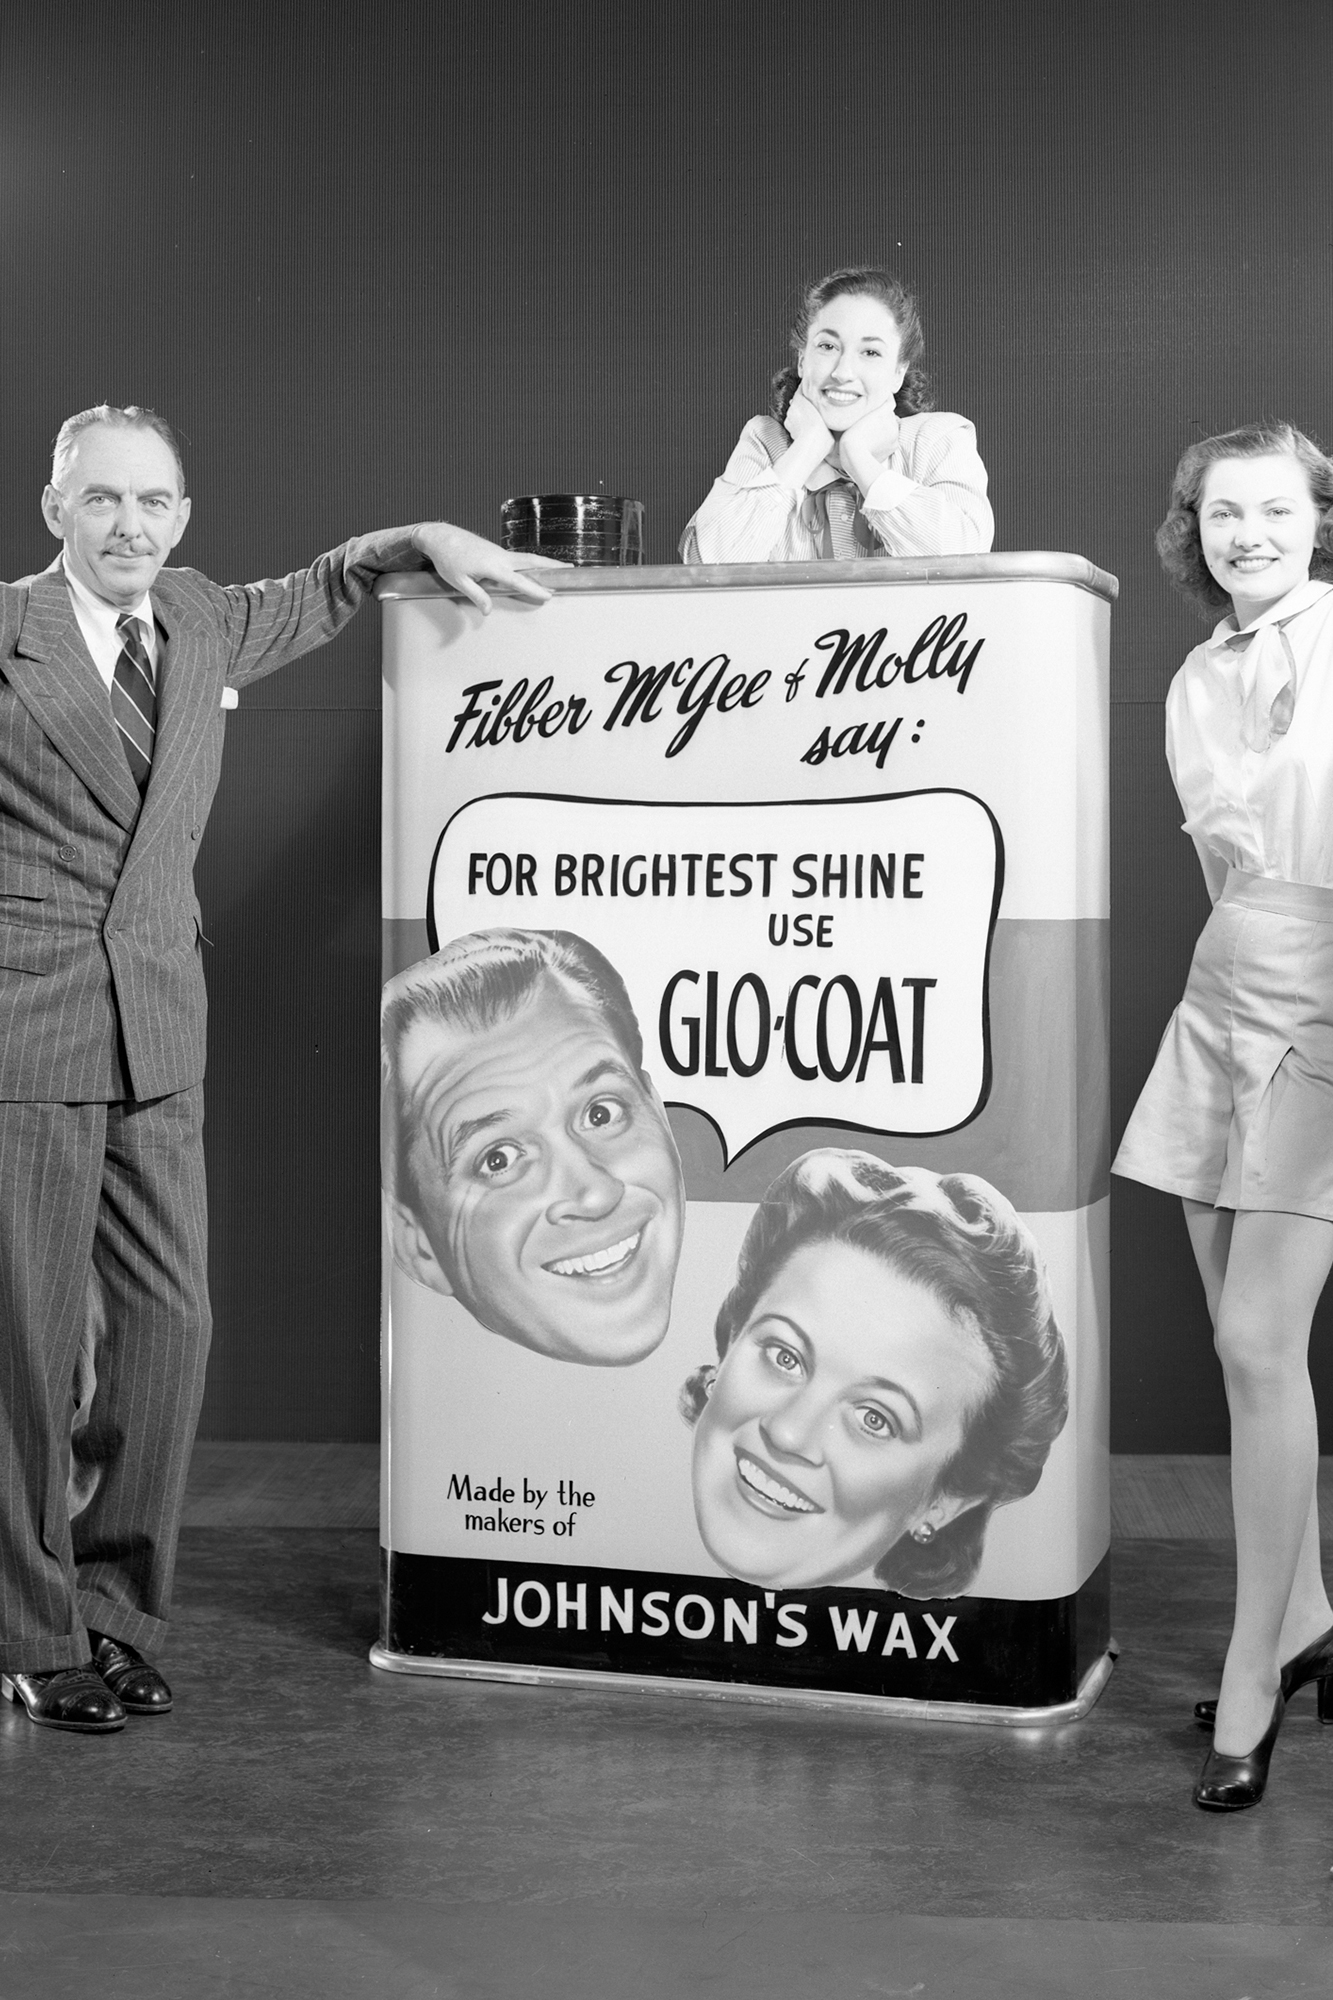 Vintage Glo-Coat™ ad from Fibber McGee and Molly old time radio show.